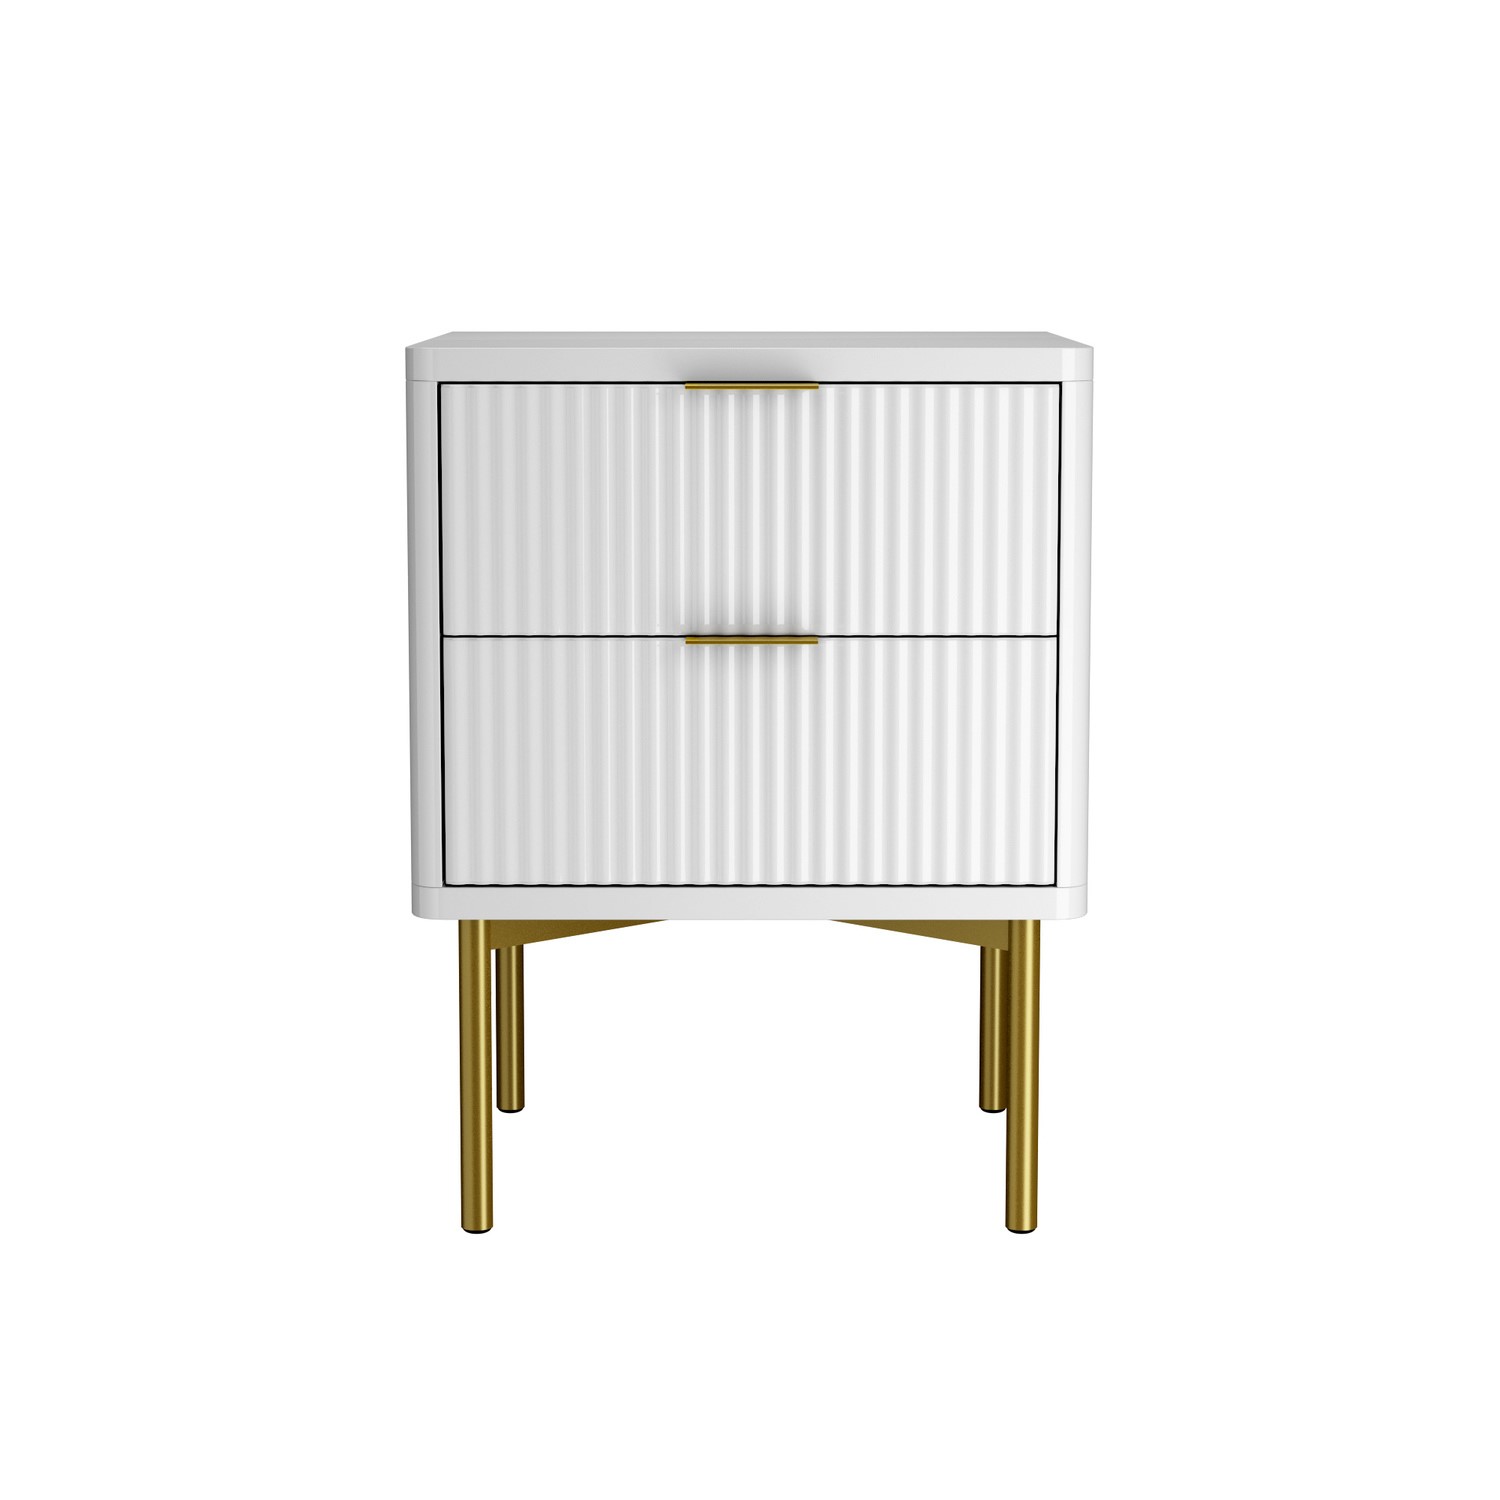 Photo of White and gold high gloss 2 drawer bedside table with legs - valencia